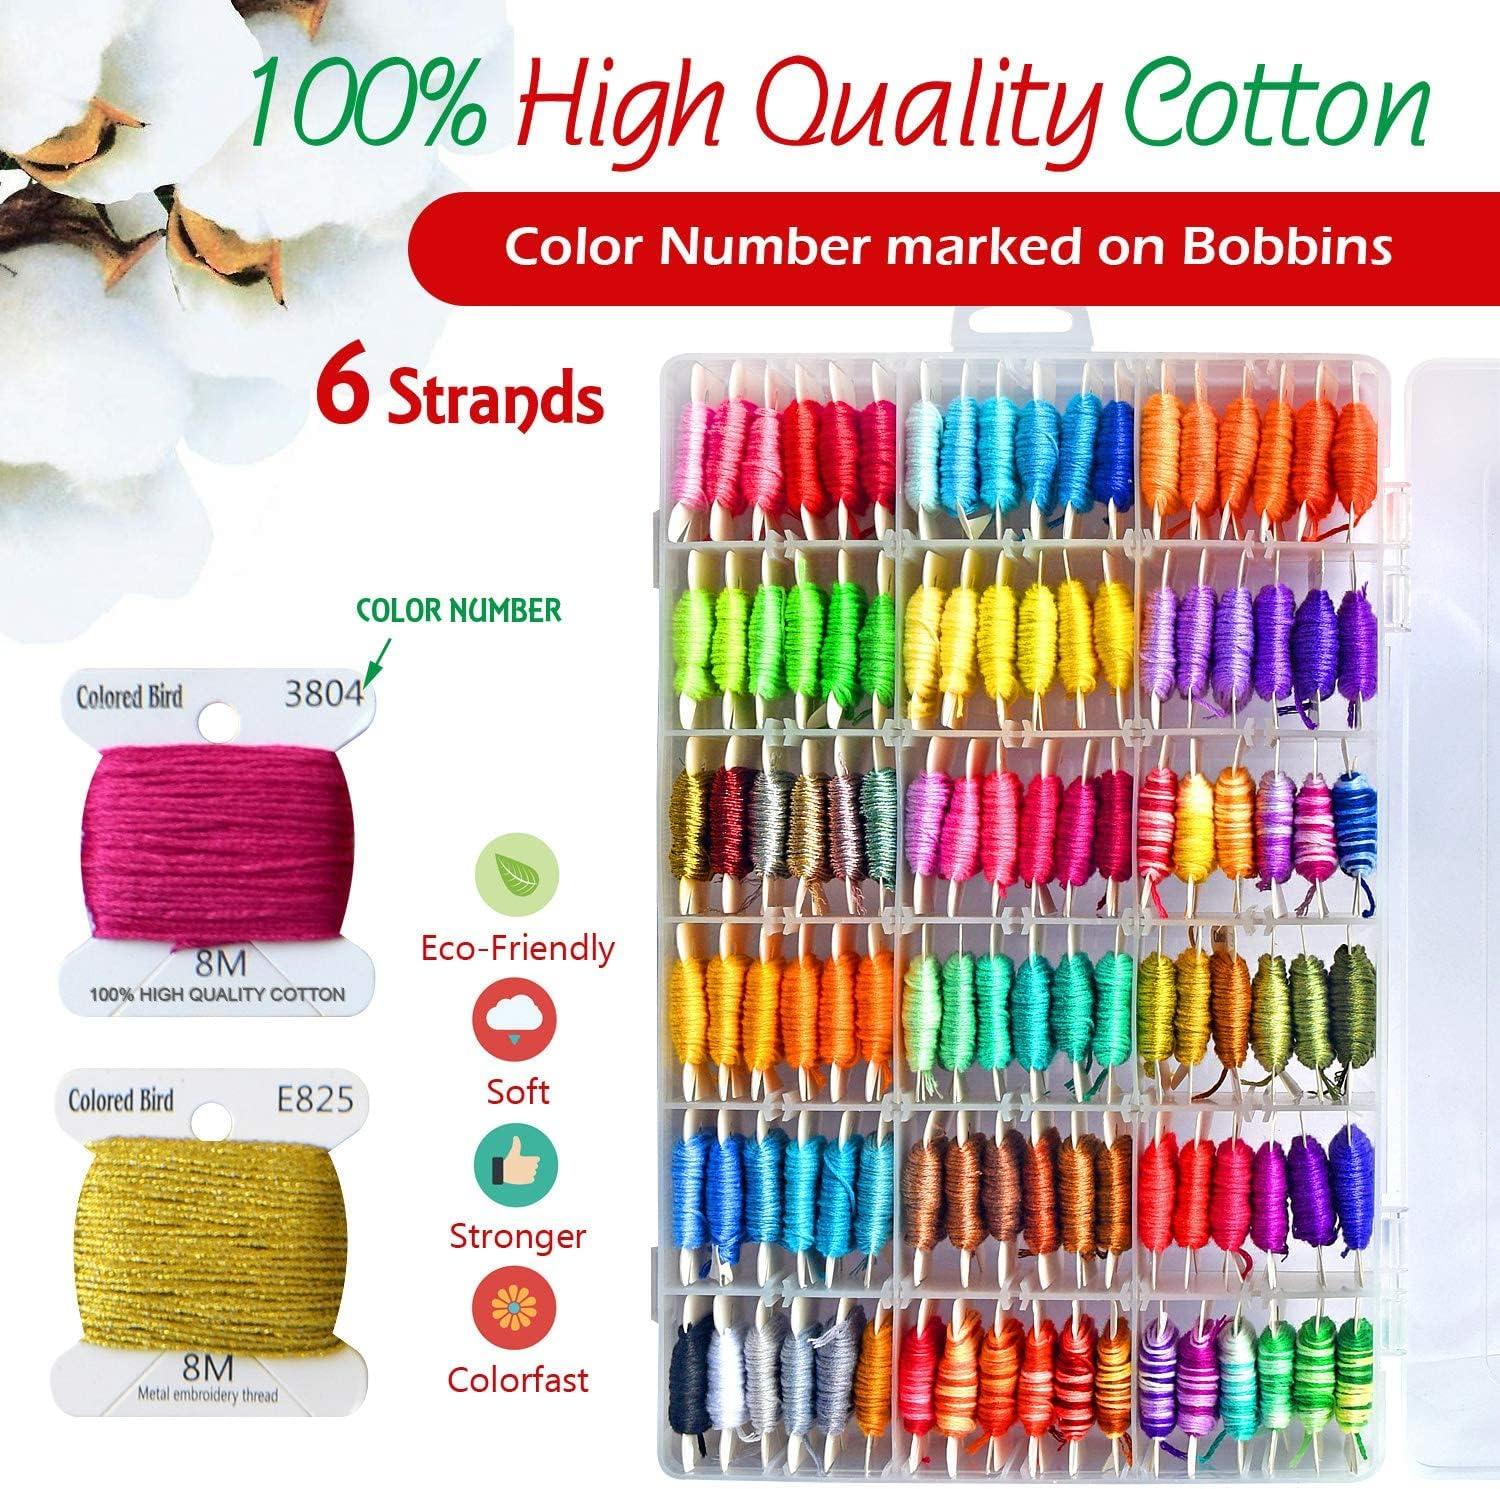 Embroidery Floss Cross Stitch Threads String Kits with Organizer Storage  Box Included 108pcs Colorful Friendship Bracelets Floss with Number  Stickers&Floss Bobbins &110 Pcs Cross Stitch Tool Kits kit1